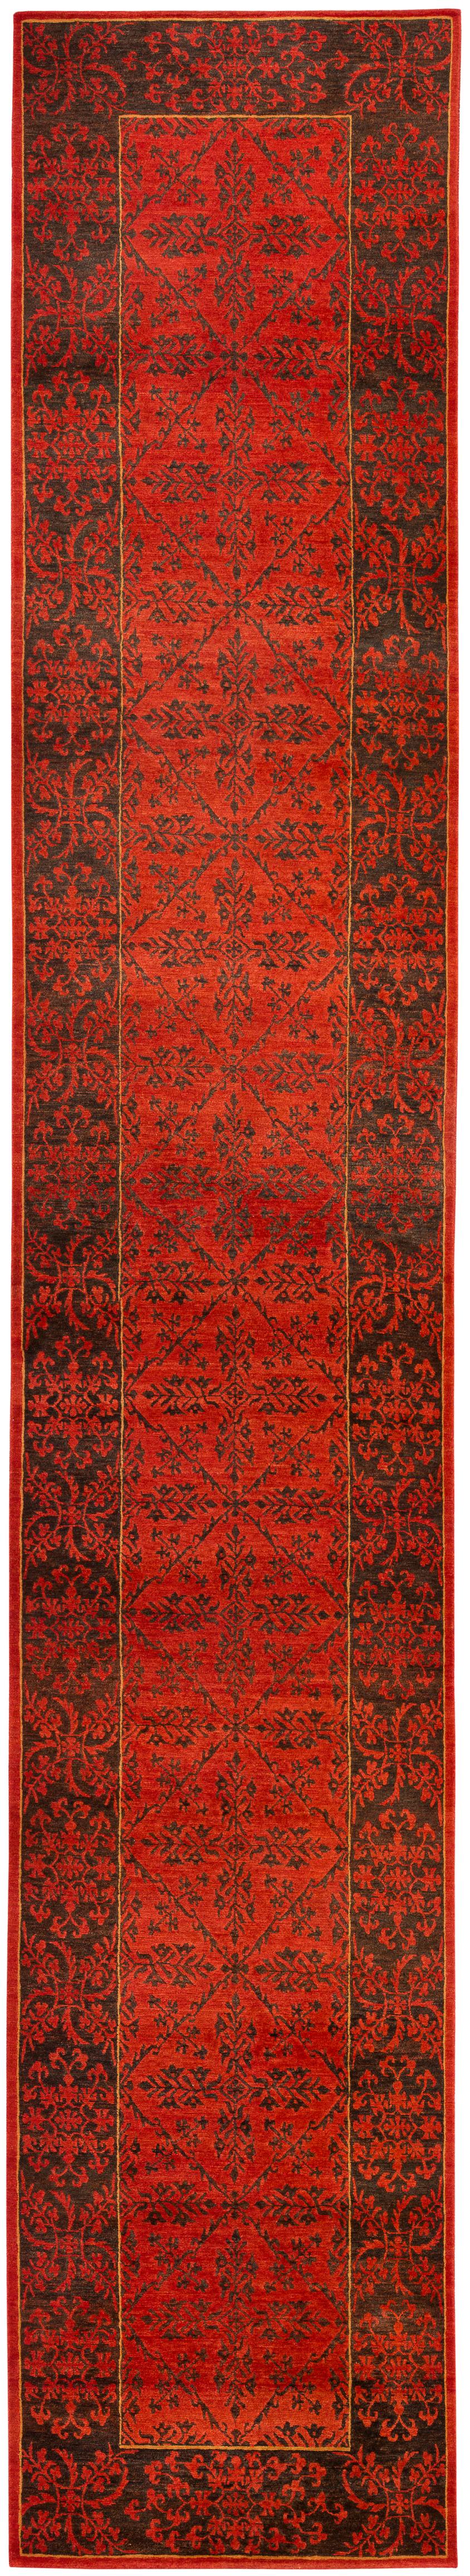 This brown and red hall runner features a traditional Tibetan design. Handwoven in the finest Himalayan wool, this rug is soft to the touch and has a slight sheen to it. This can be seen in the photos.